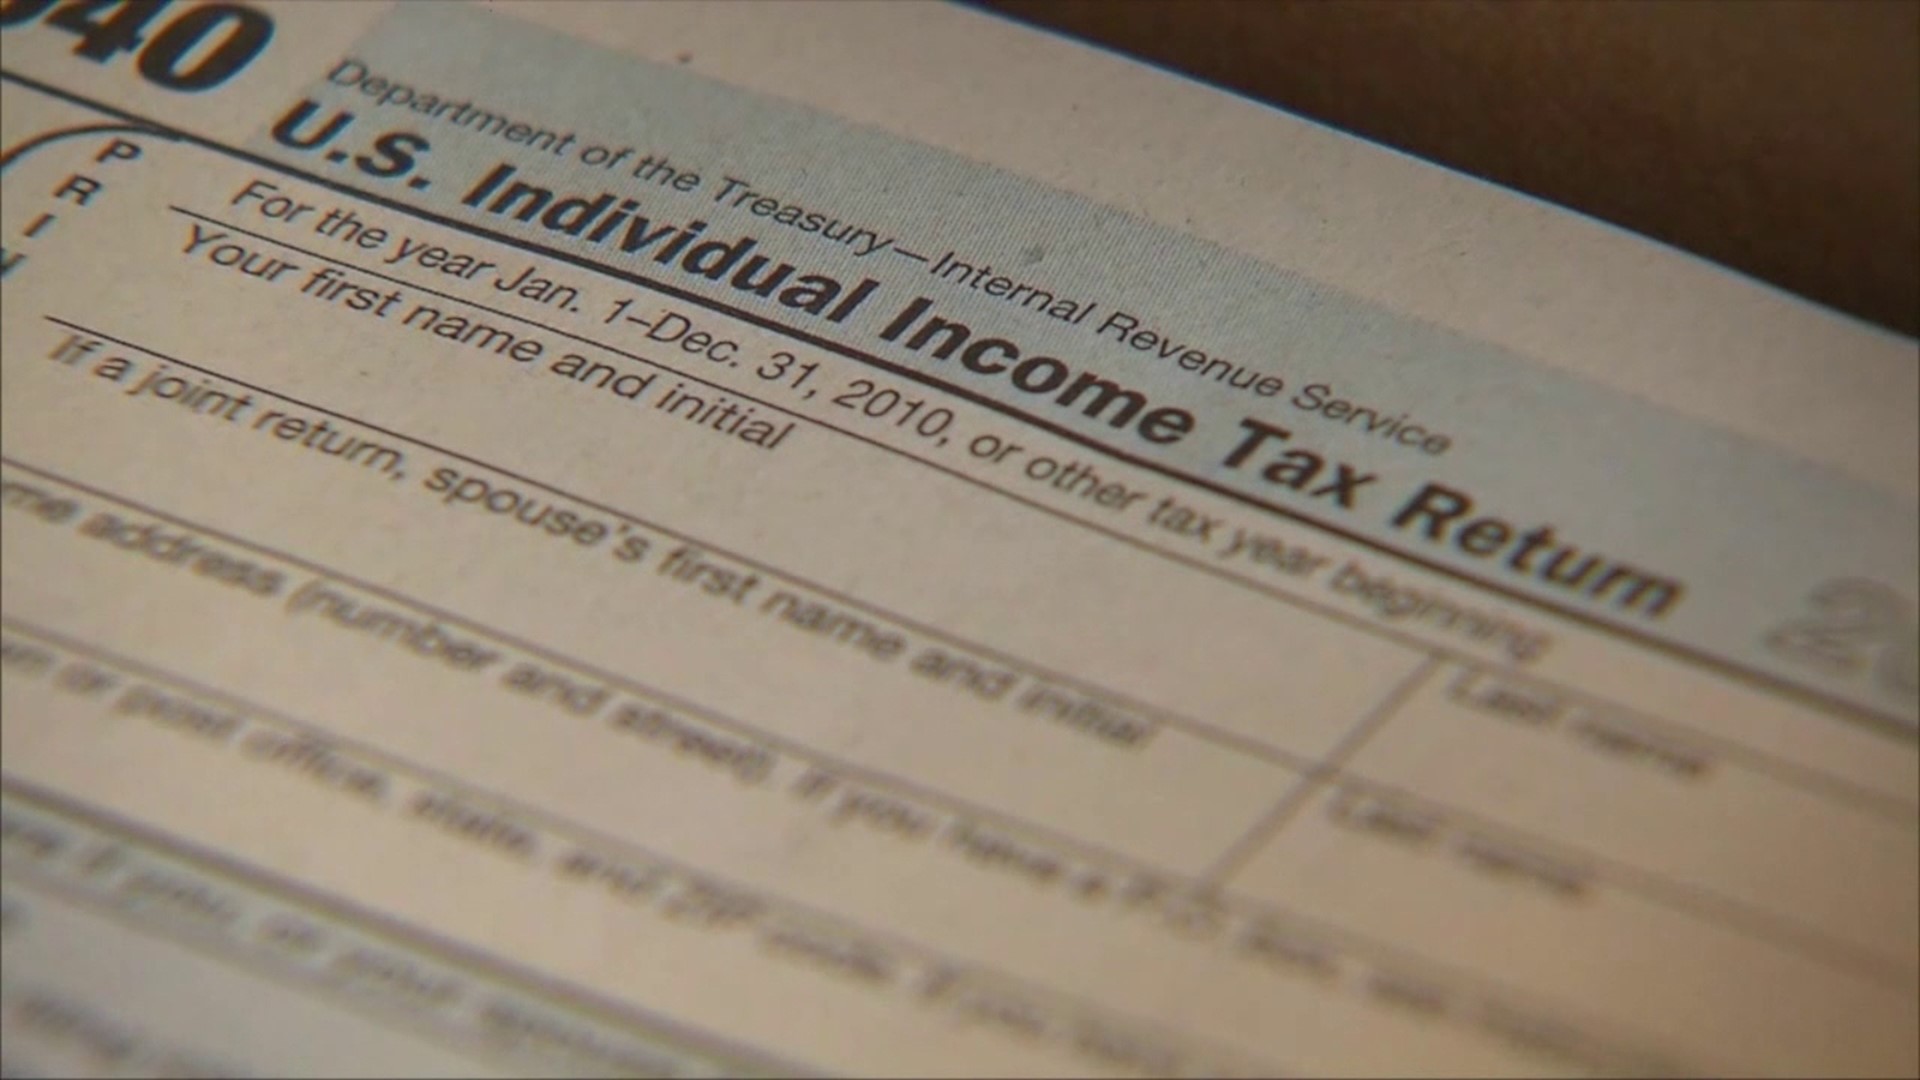 It's time to get your paperwork together. Monday, January 23, is the first day you can file your federal income taxes.